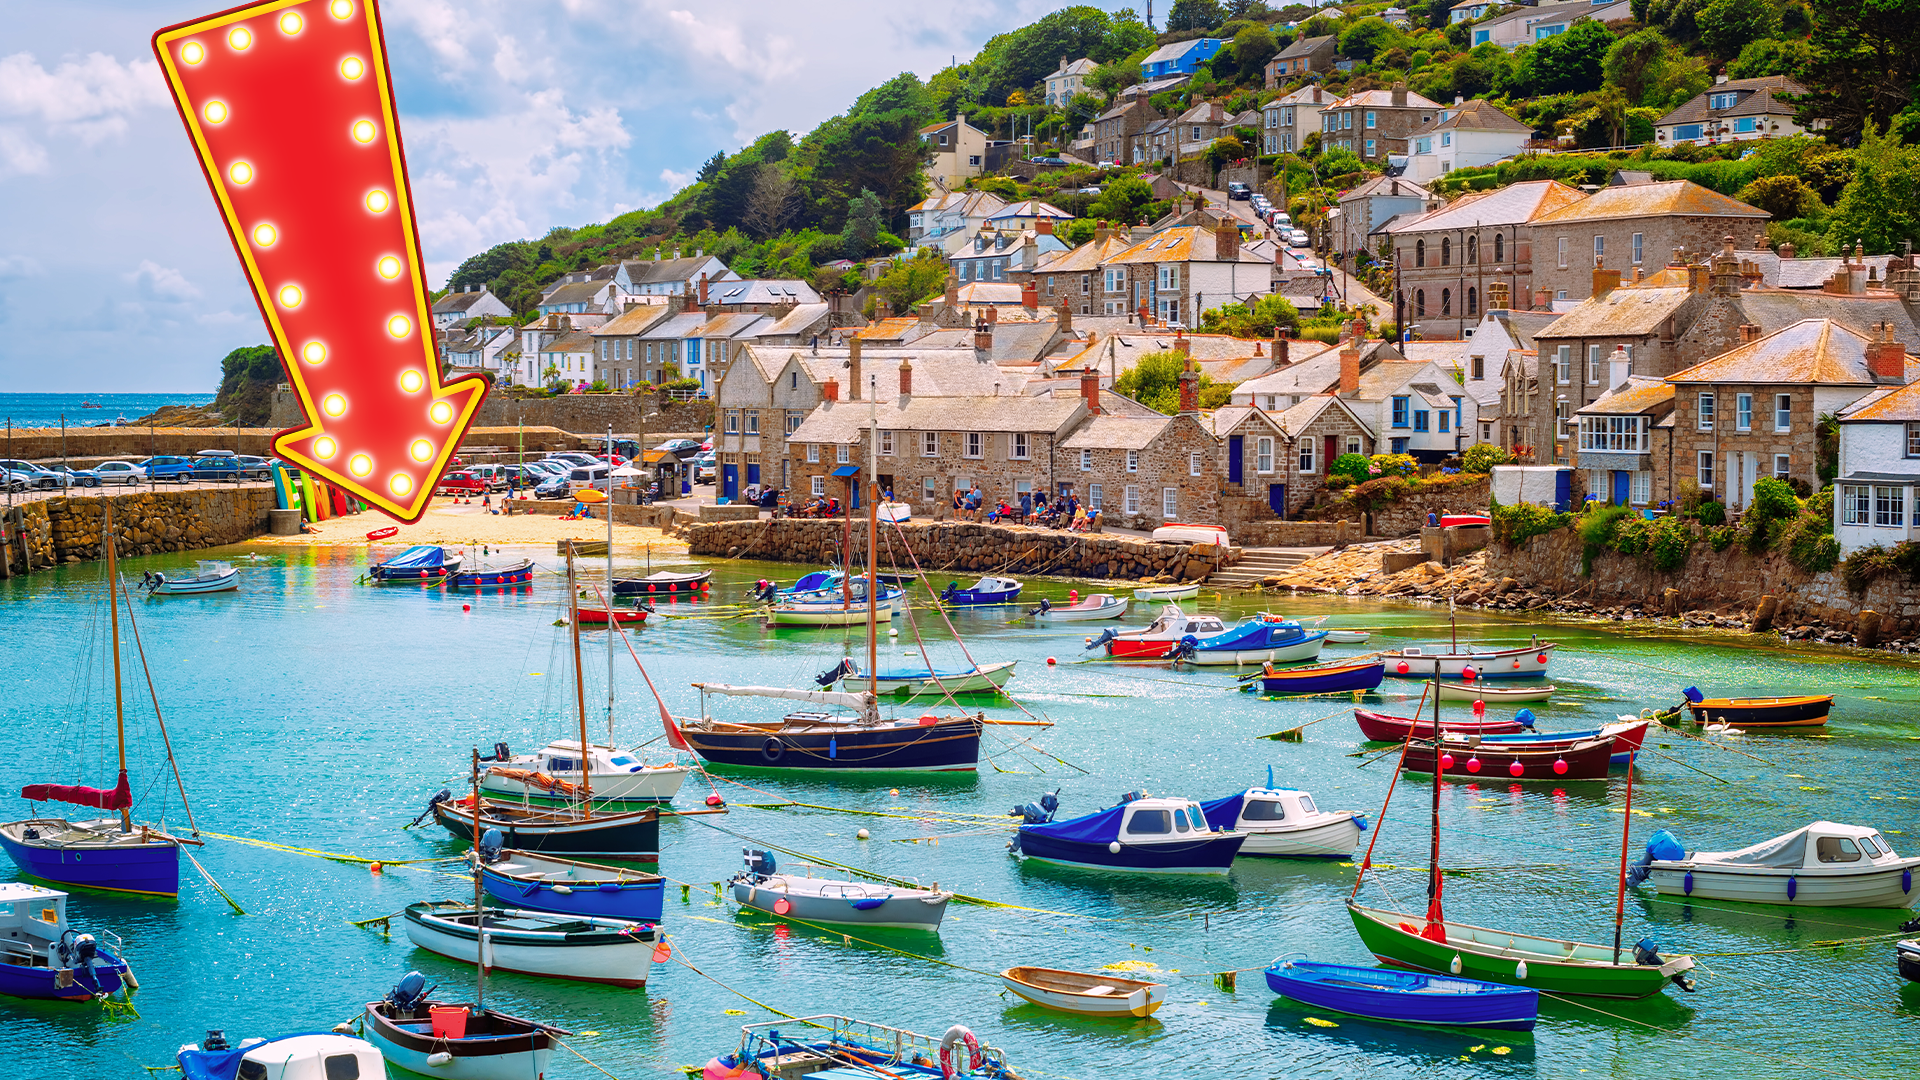 A scenic picture of a Cornish harbour and an arrow